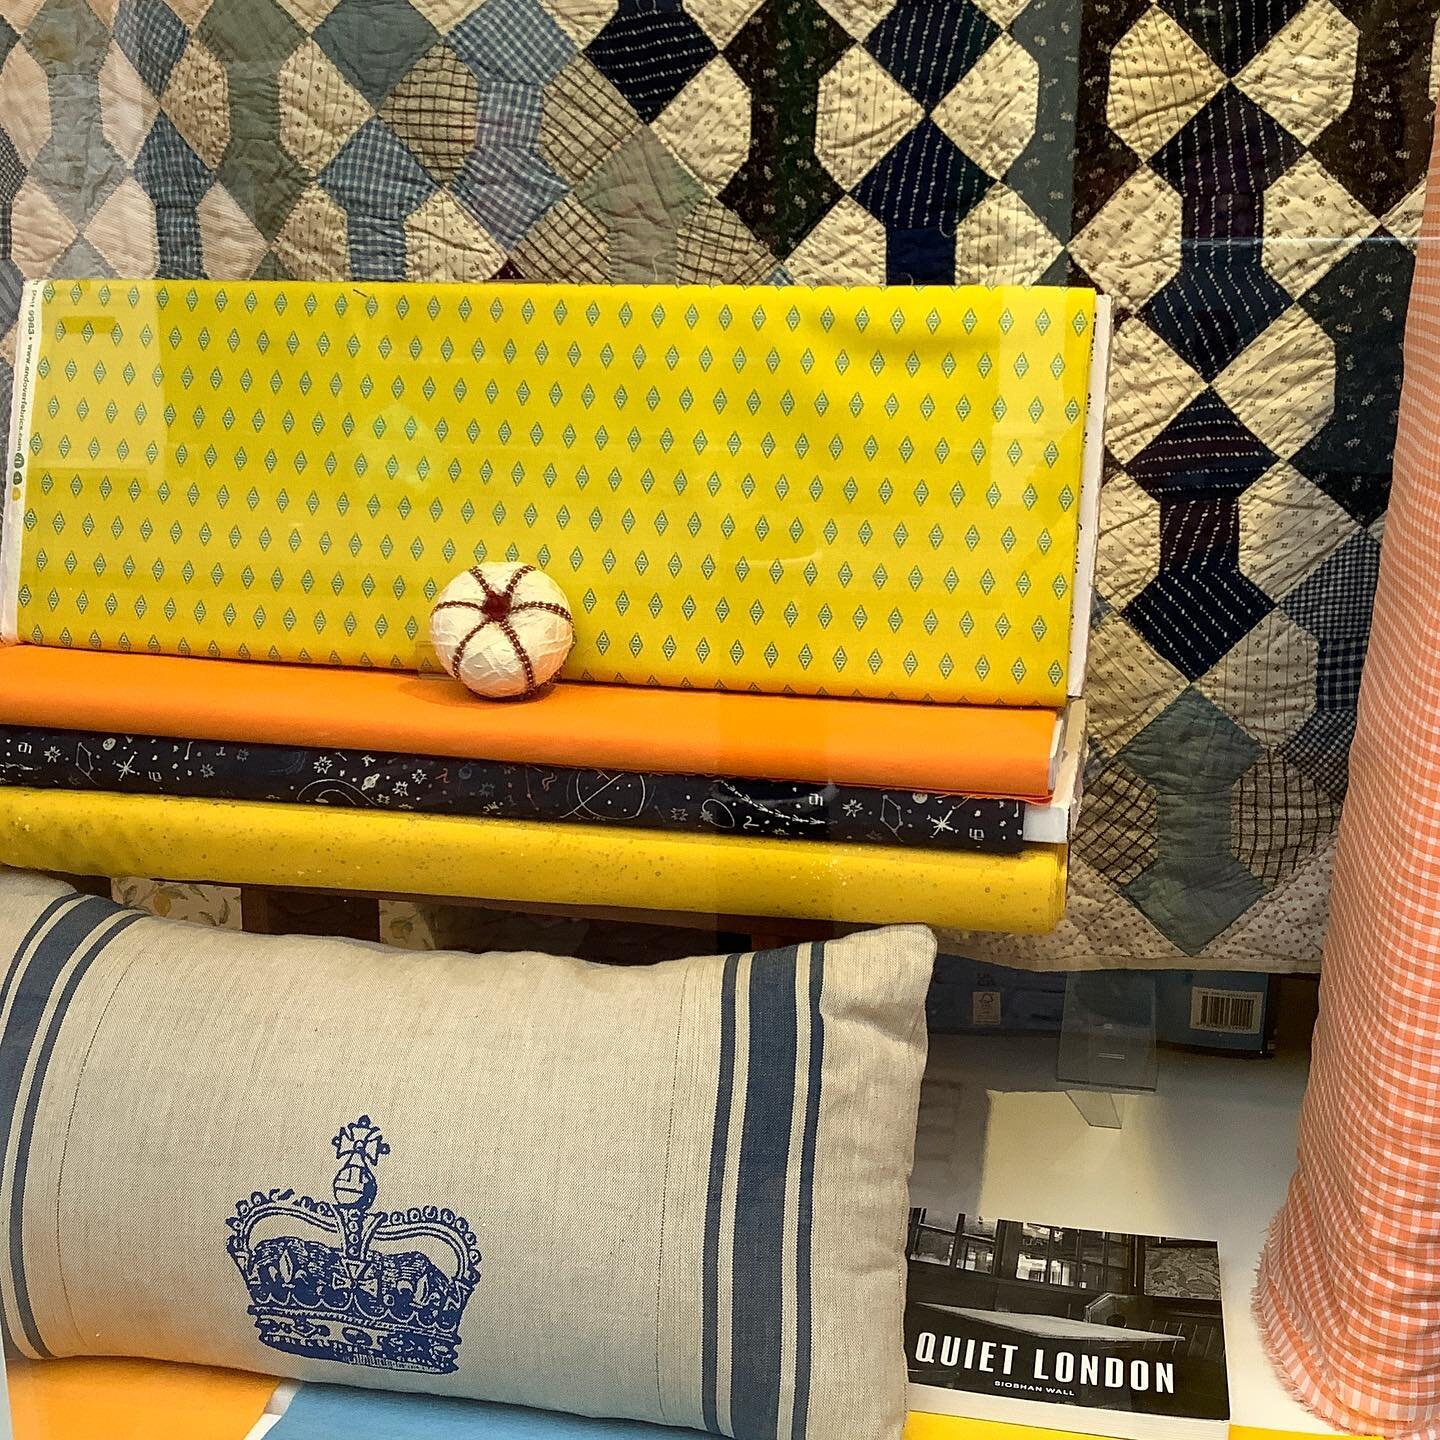 Can you spot clues to the big day in our current shop window - crowns, dapper dressed folk and maybe an ironic book title?

And by chance the yellow is the exact colour of the stunning dress worn by opera singer, Pretty Yende at the coronation. What 